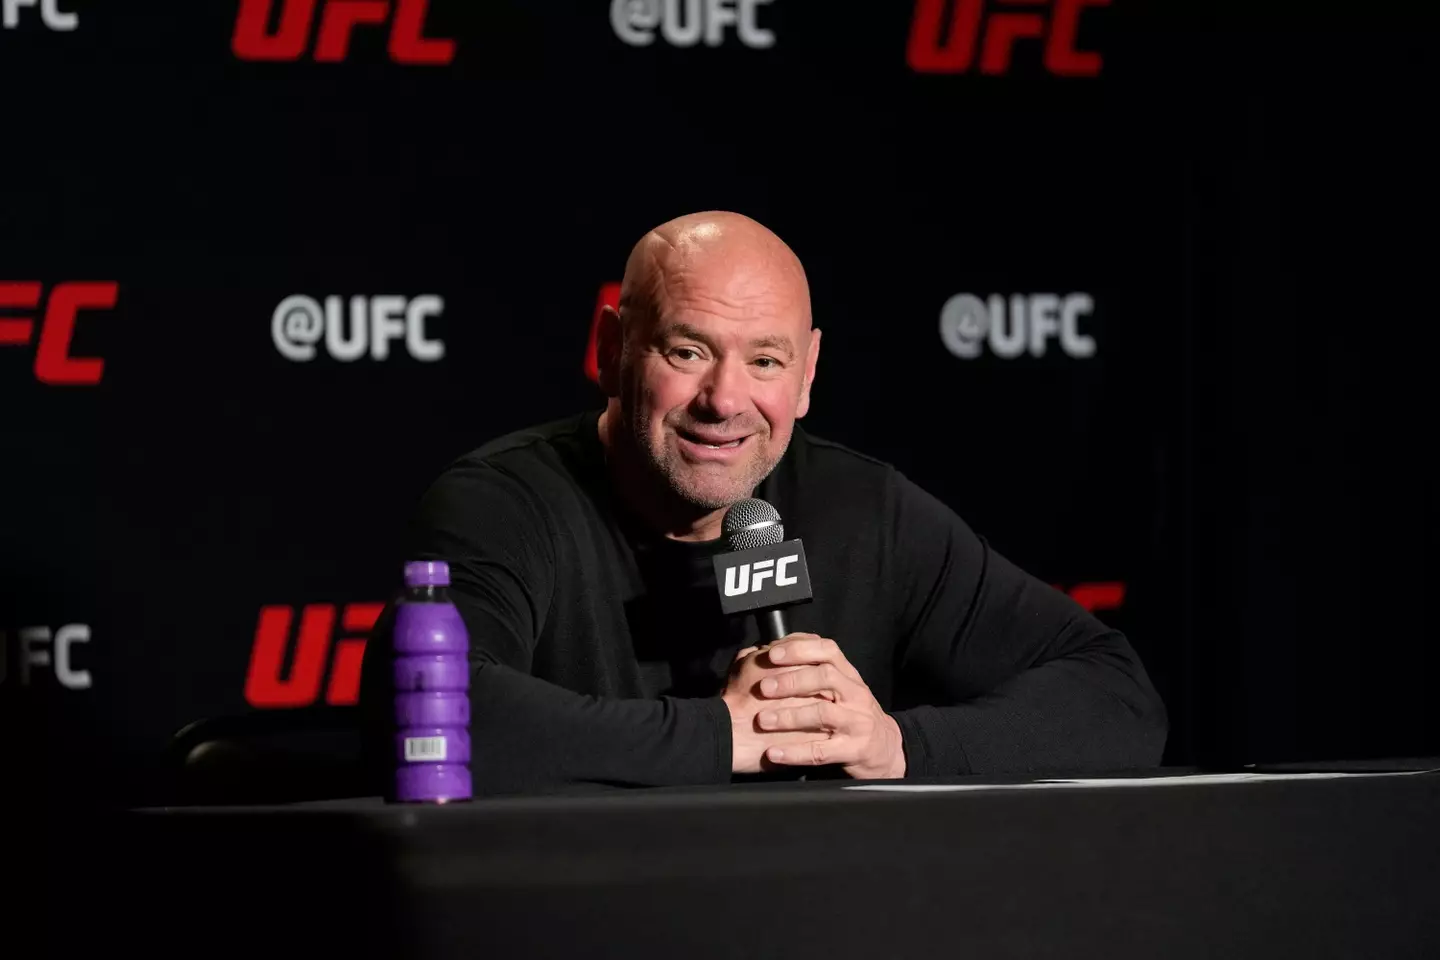 Dana White during a UFC press conference. Image: Alamy 